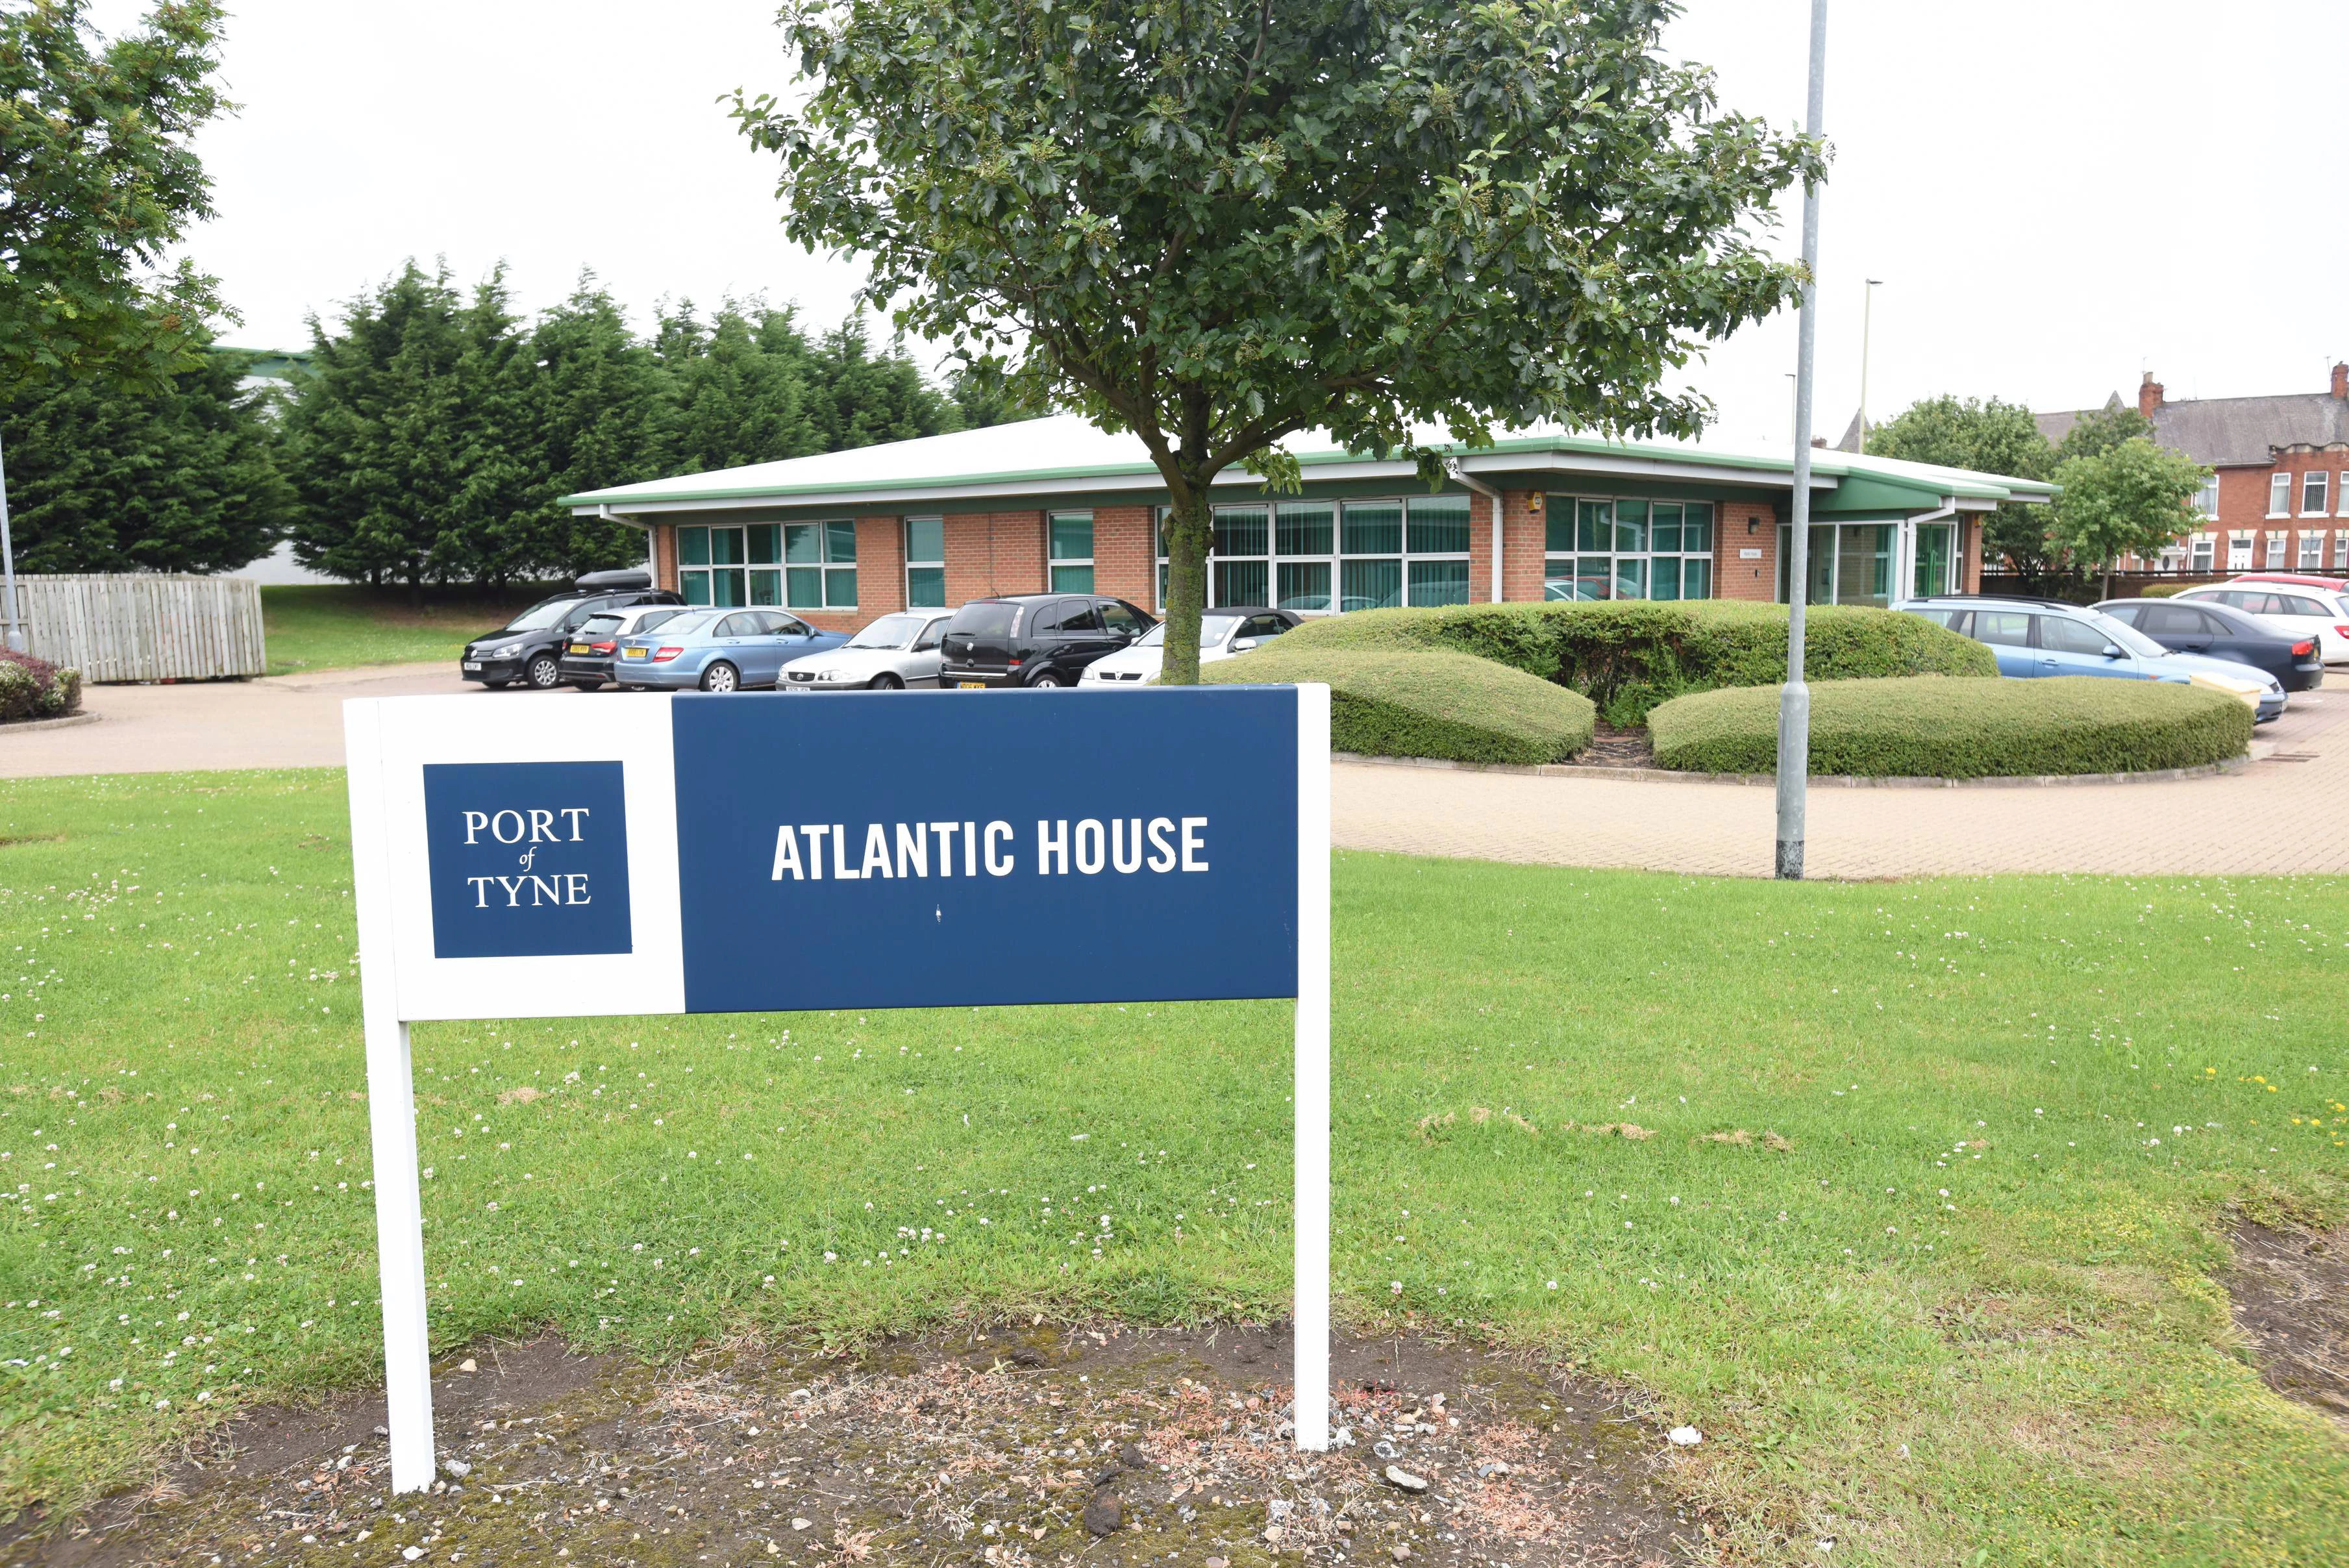 Atlantic House, the new Headquarters for The Green Energy Advice Bureau located at Port of Tyne